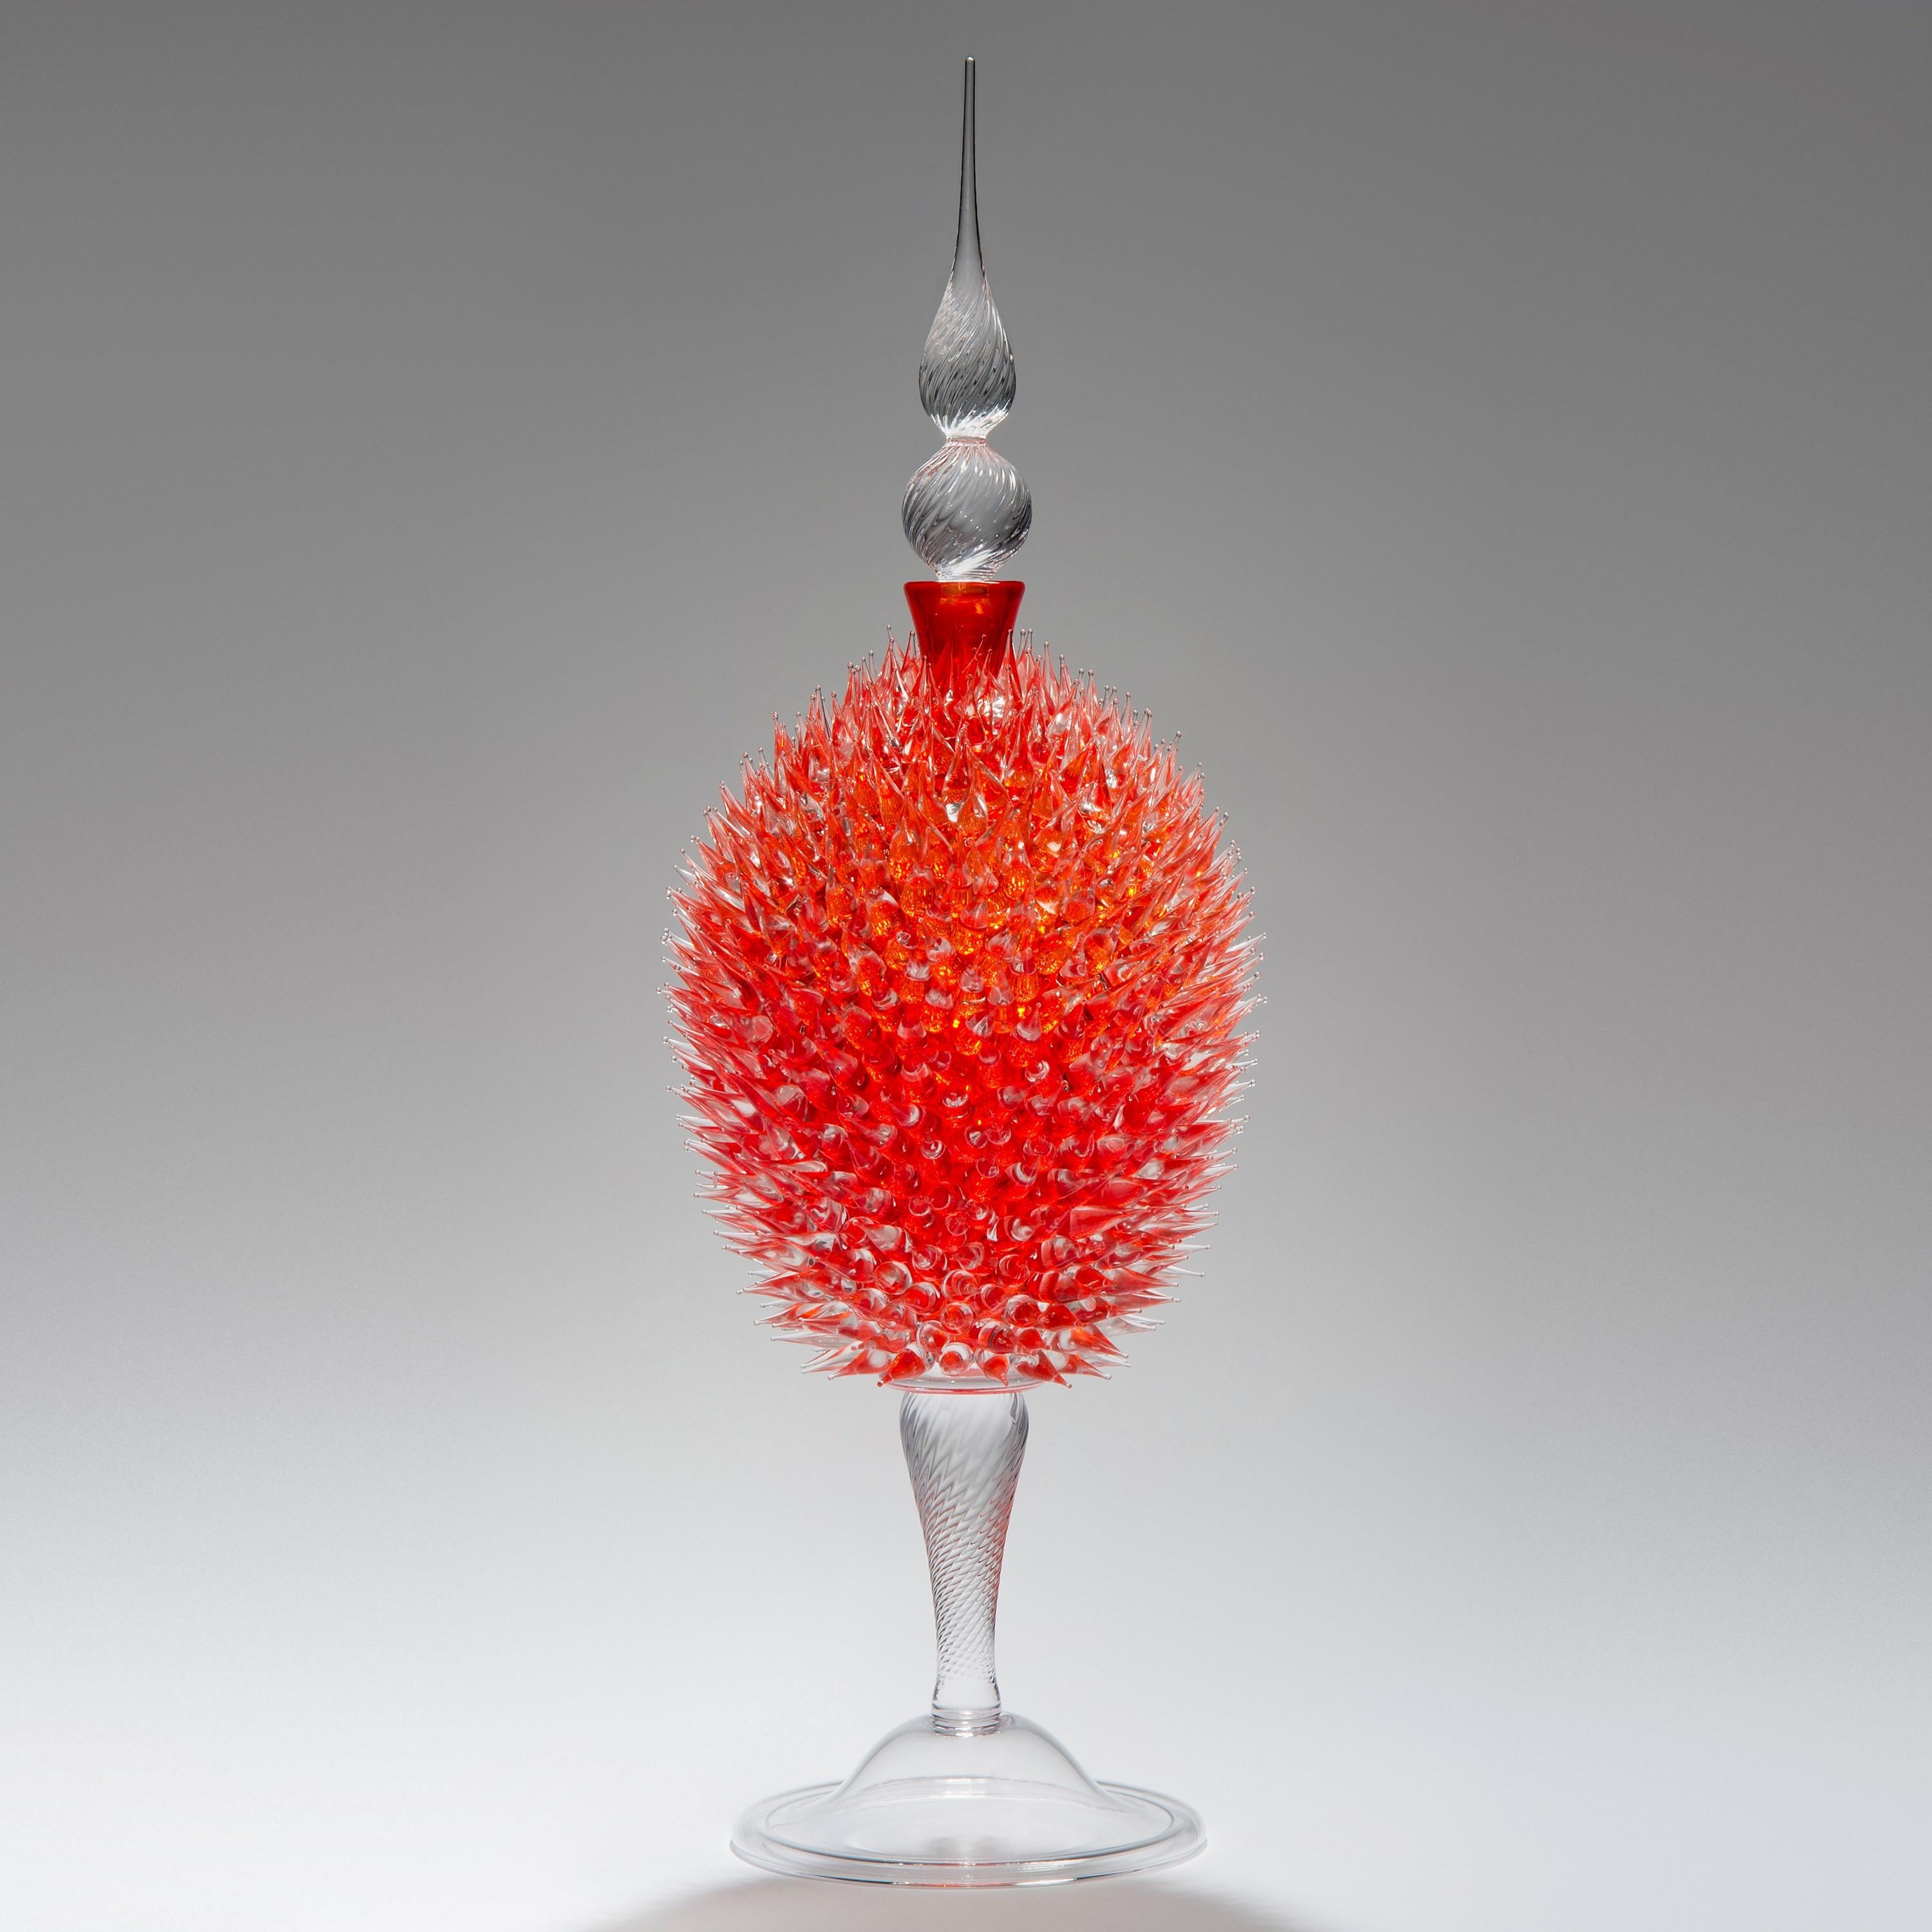 'Acanthus Veronese in Orange' is a unique sculptural glass jar by British glass artist James Lethbridge. Blown glass with the outer layer covered in flame worked decoration and adornment. With removable decorative glass stopper.

Initially